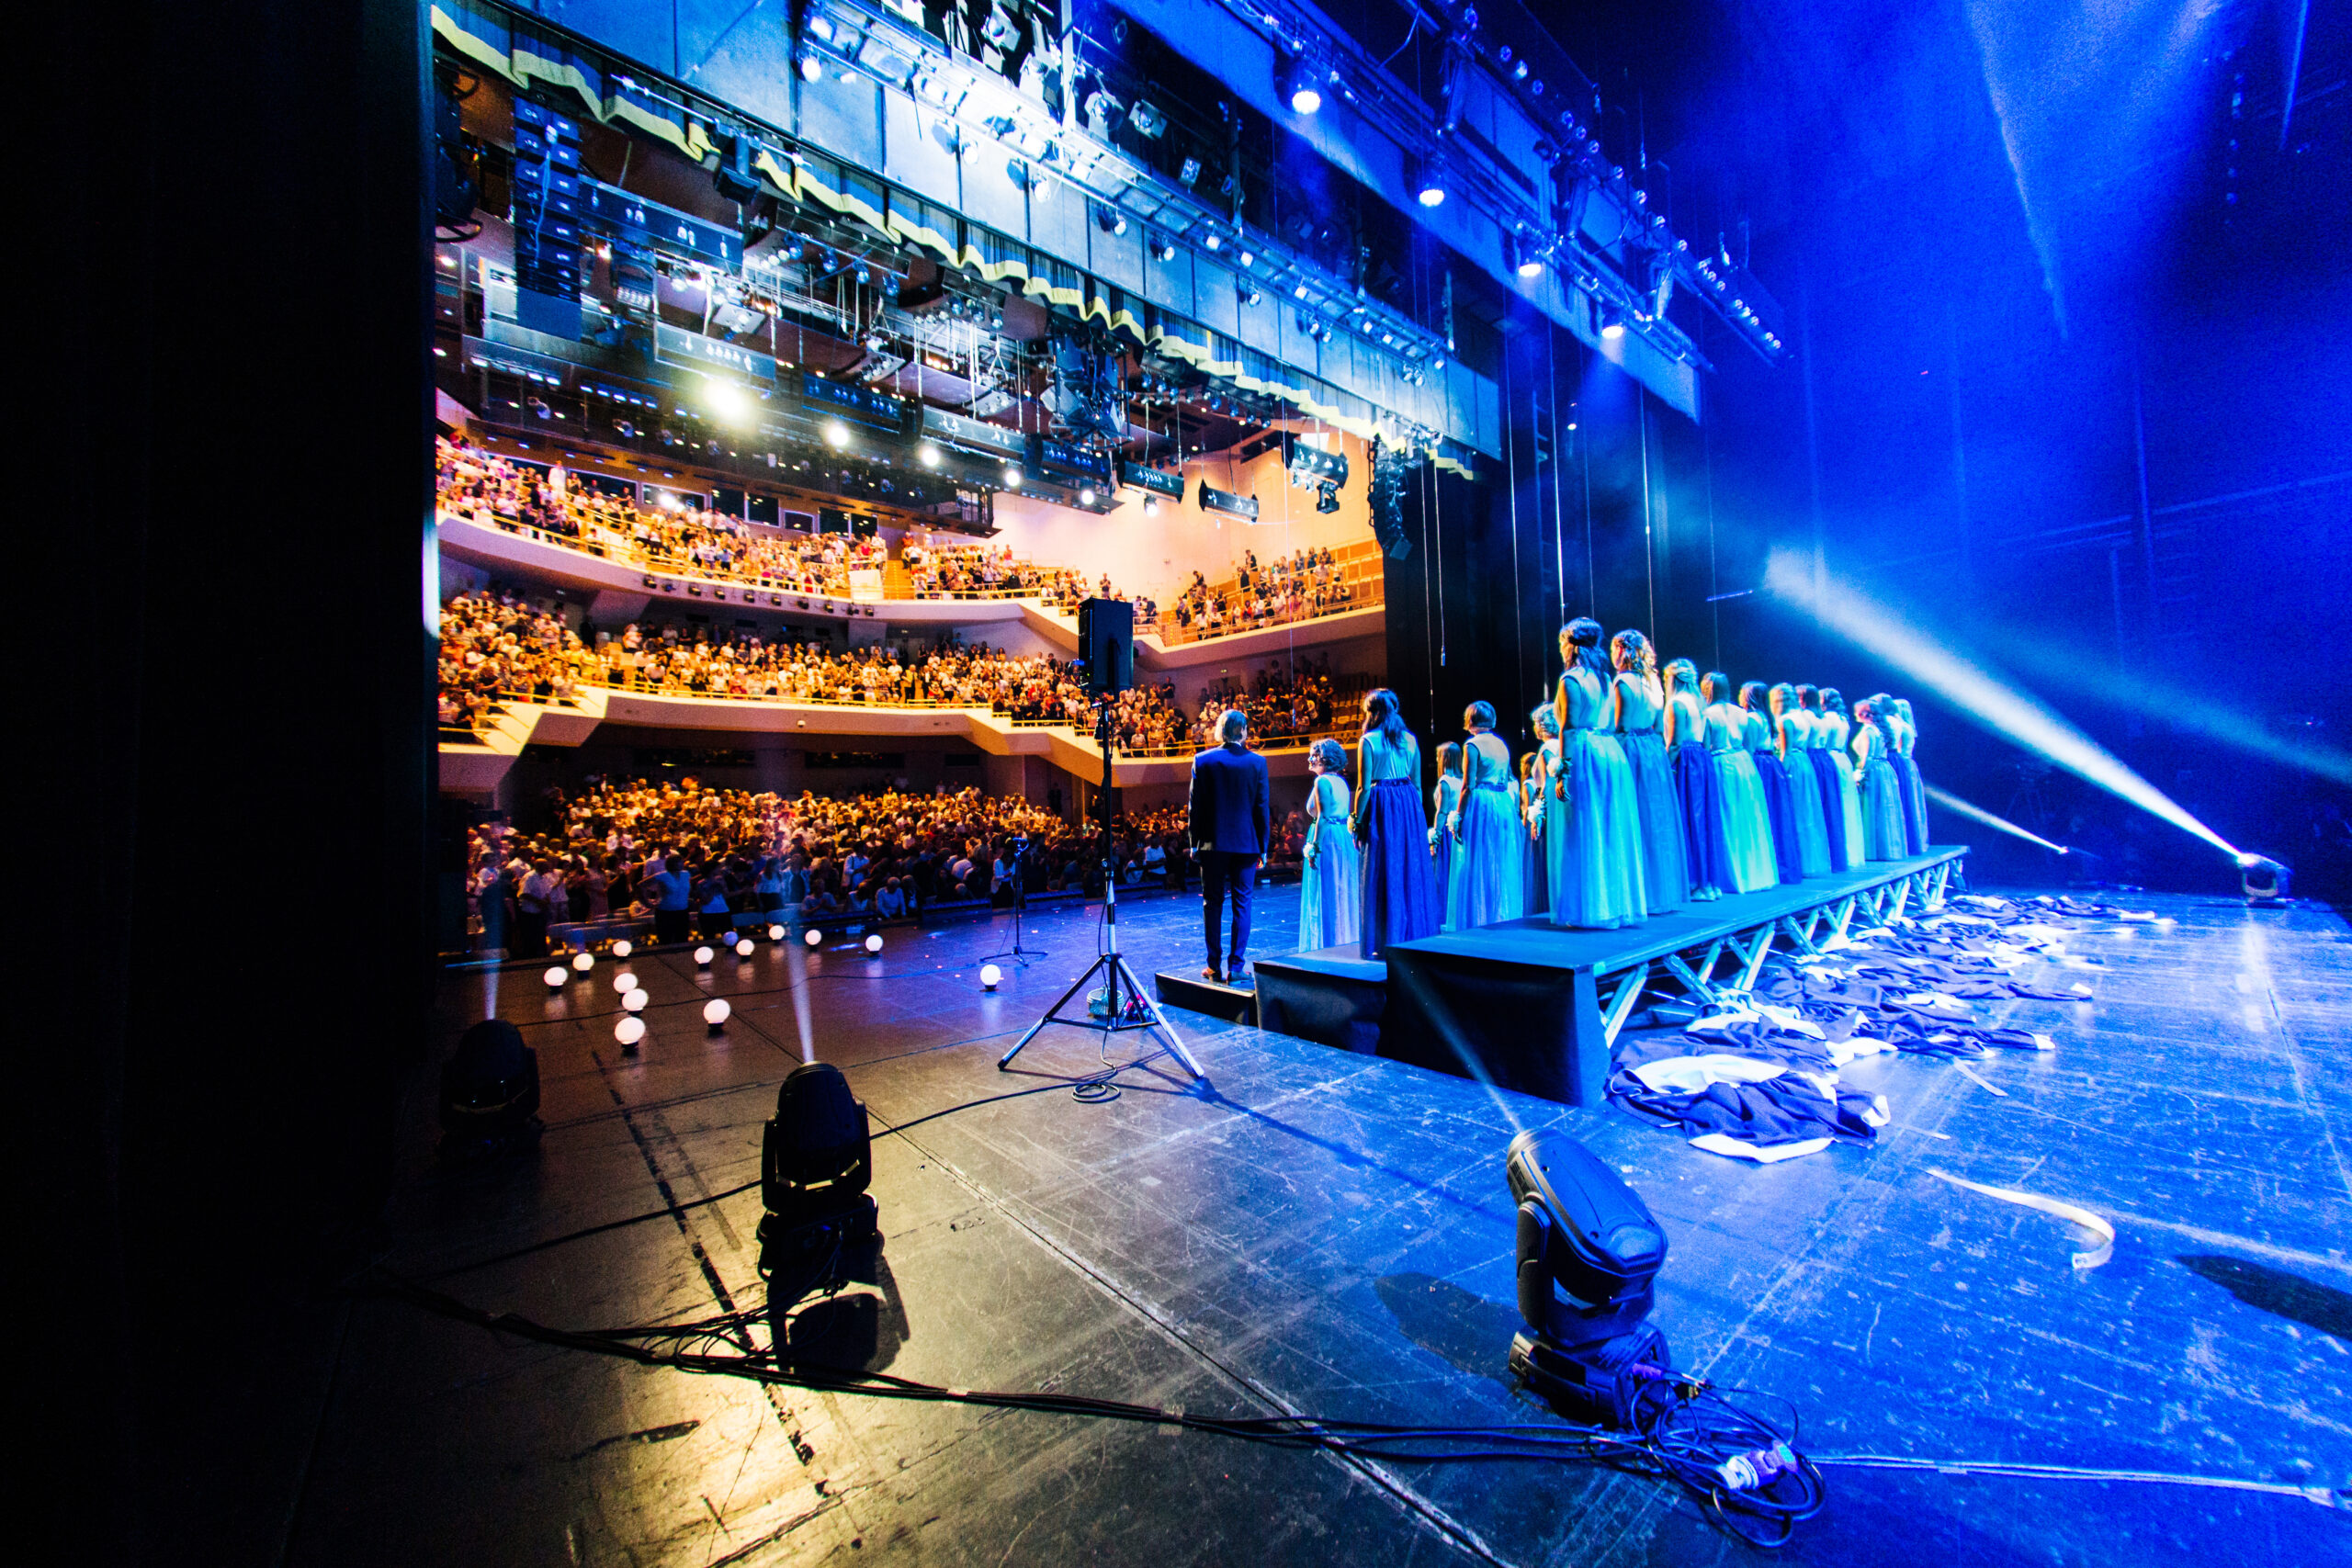 Marko Alpner, Slovenia: Standing Ovation, 2018, Carmen manet, Slovenia - The concert “Vidim te” (I see you) by Carmen manet, a Kranj-based female choir, filled to the very last seat the Gallus Hall of Cankarjev dom. The audience thanked the singers for their energy with a long standing ovation.